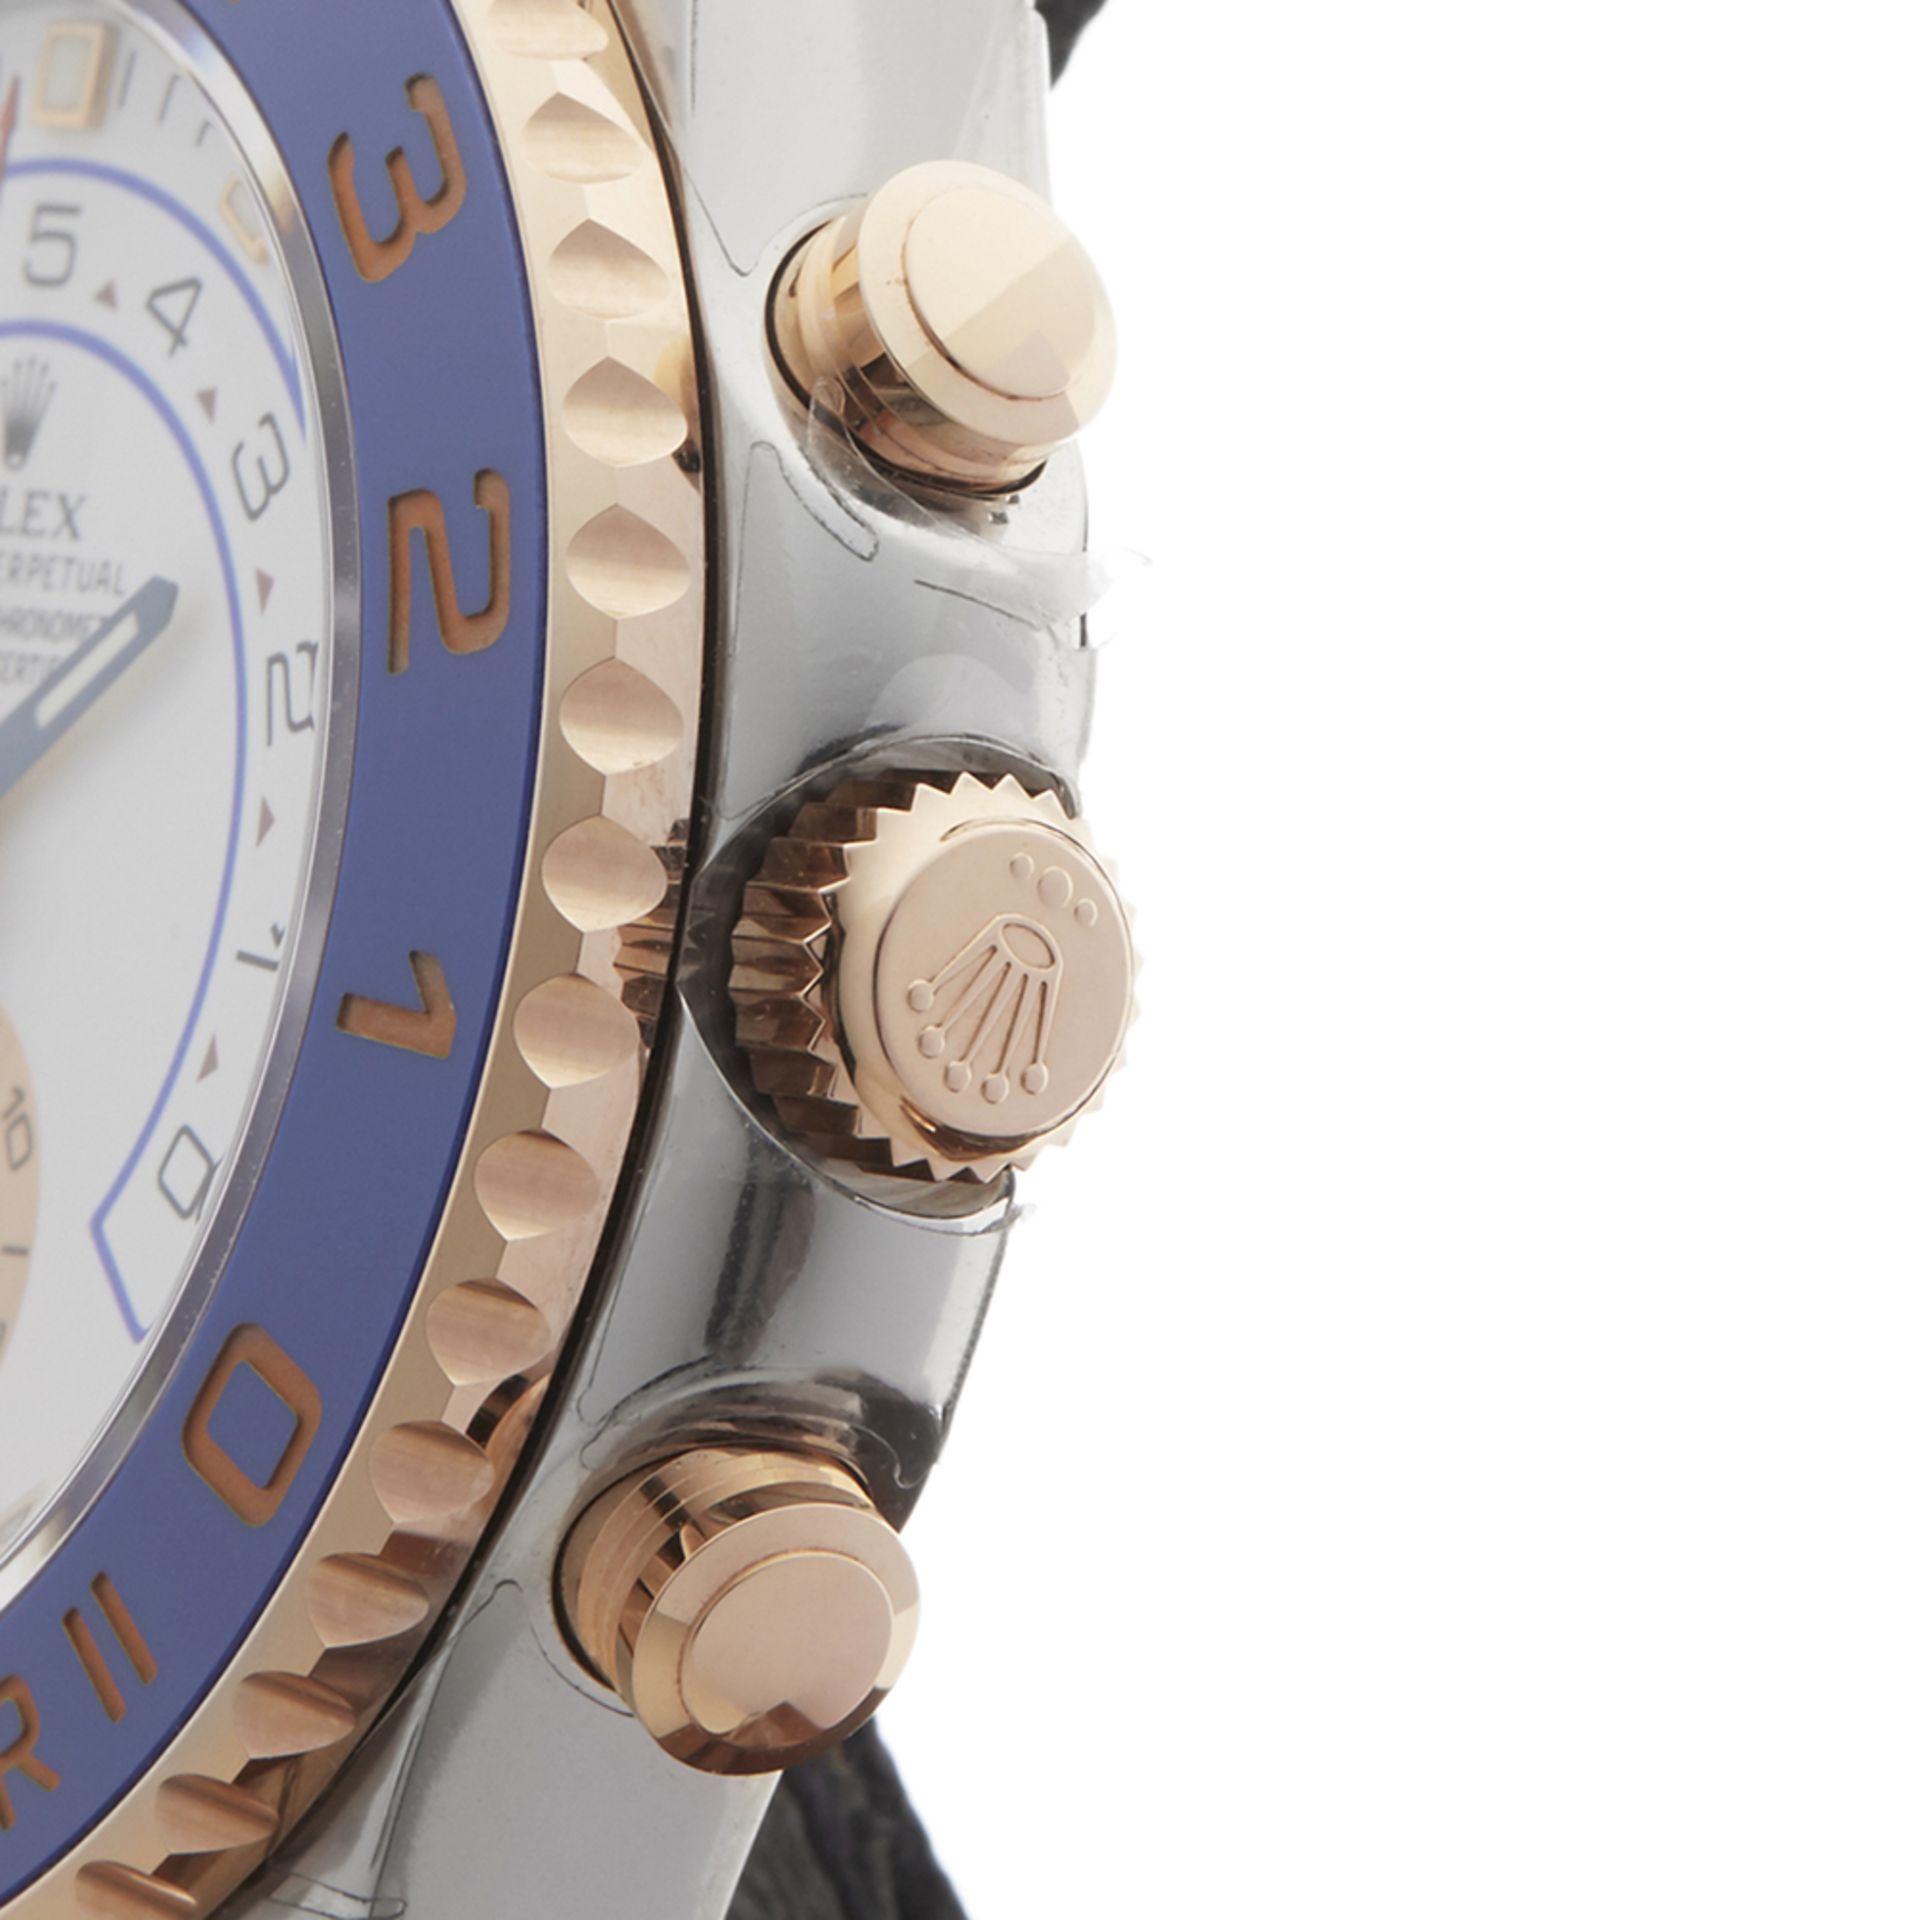 Rolex Yacht-Master II 44mm Stainless Steel & 18k Rose Gold - 116681 - Image 4 of 9